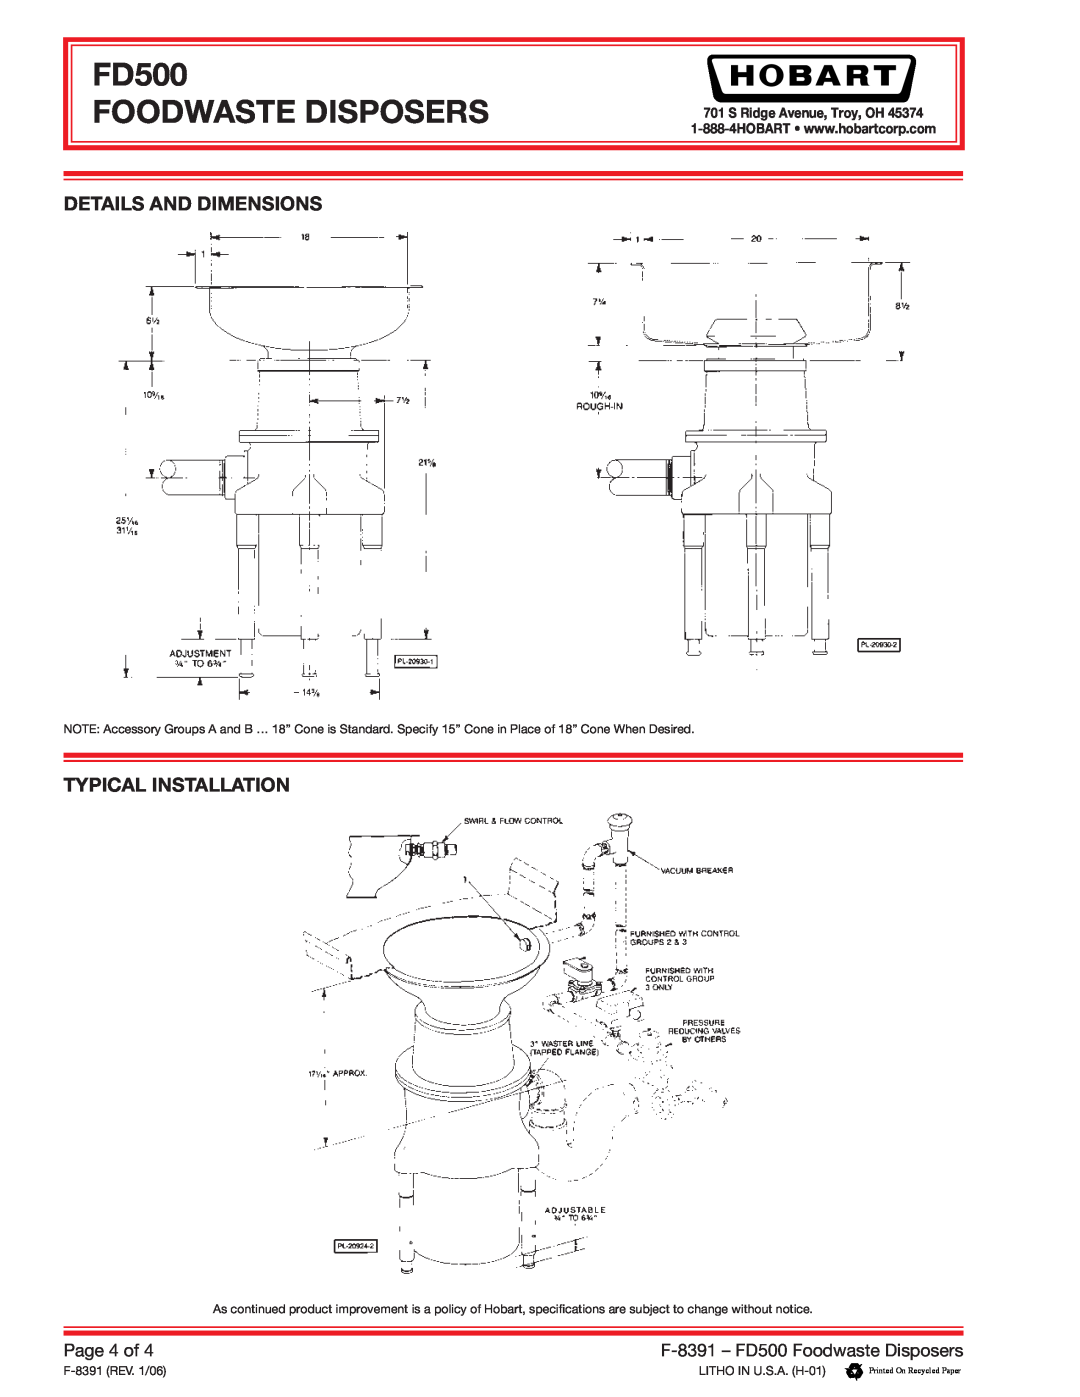 Hobart specifications Details And Dimensions, Typical Installation, FD500 FOODWASTE DISPOSERS, Page 4 of 